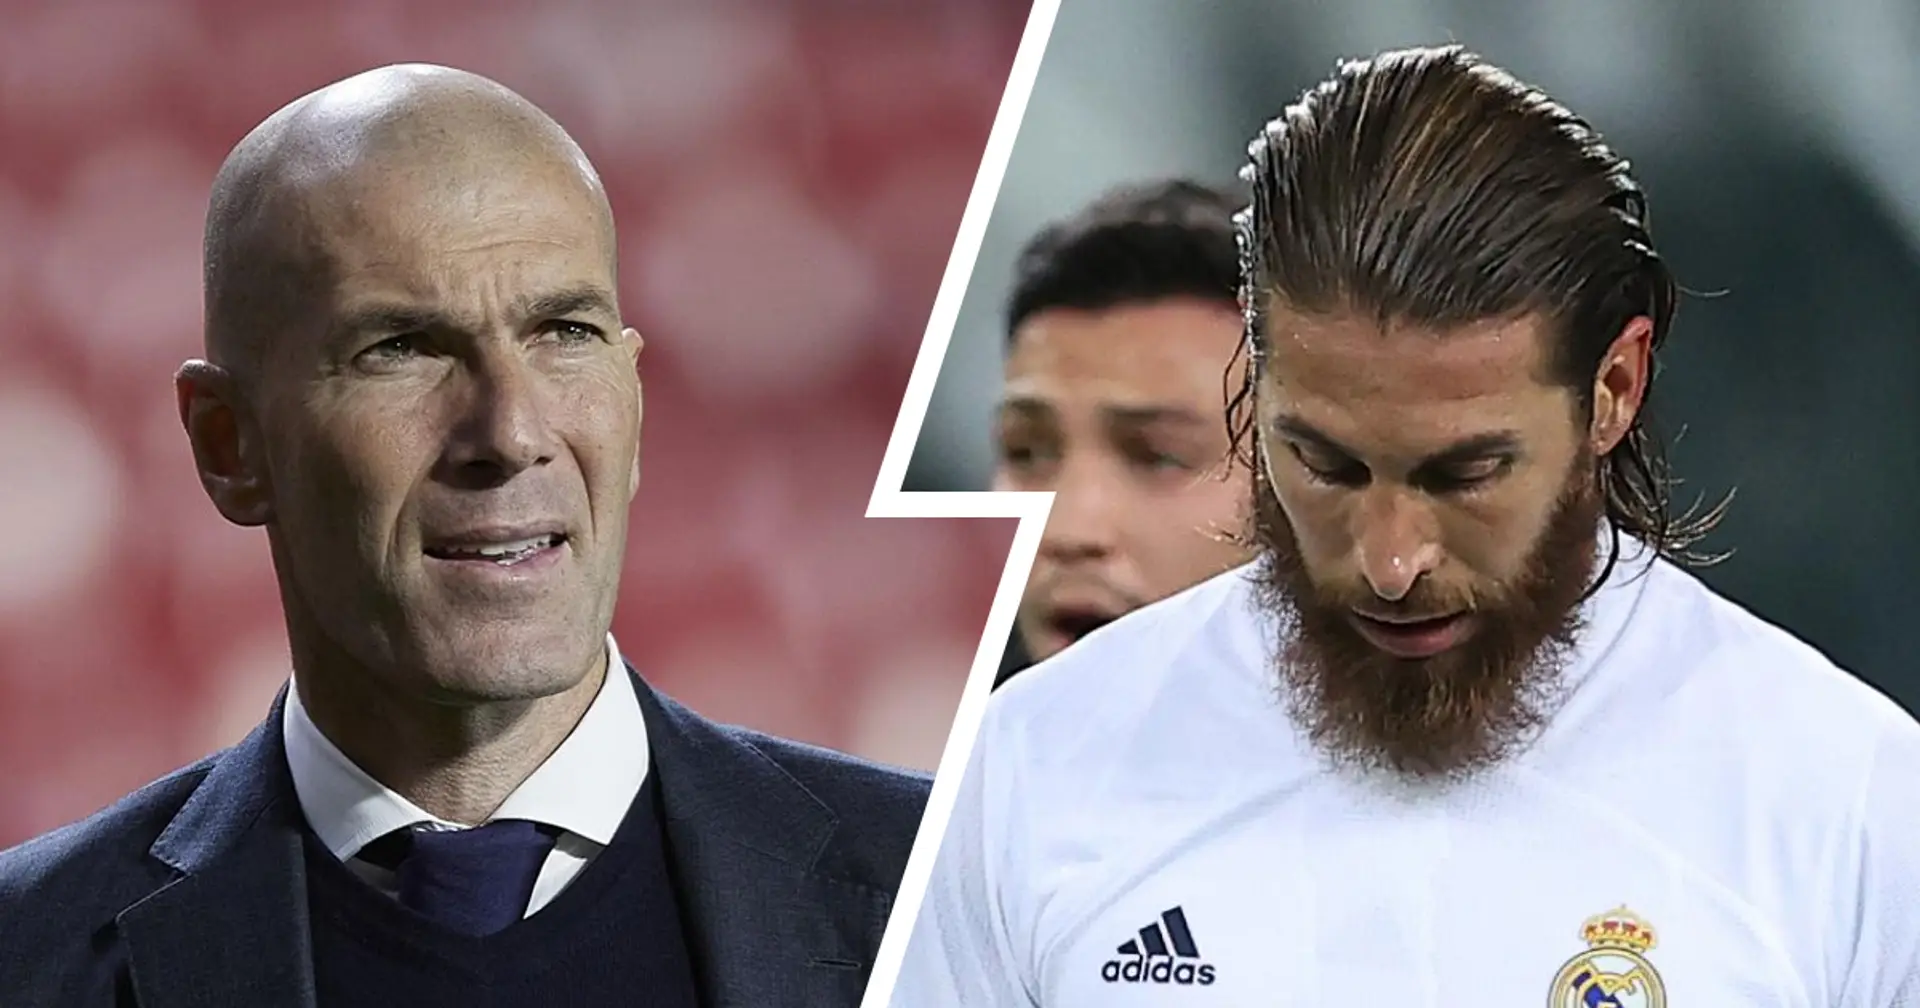 Zidane sends farewell message to Ramos & 4 other stories you might've missed